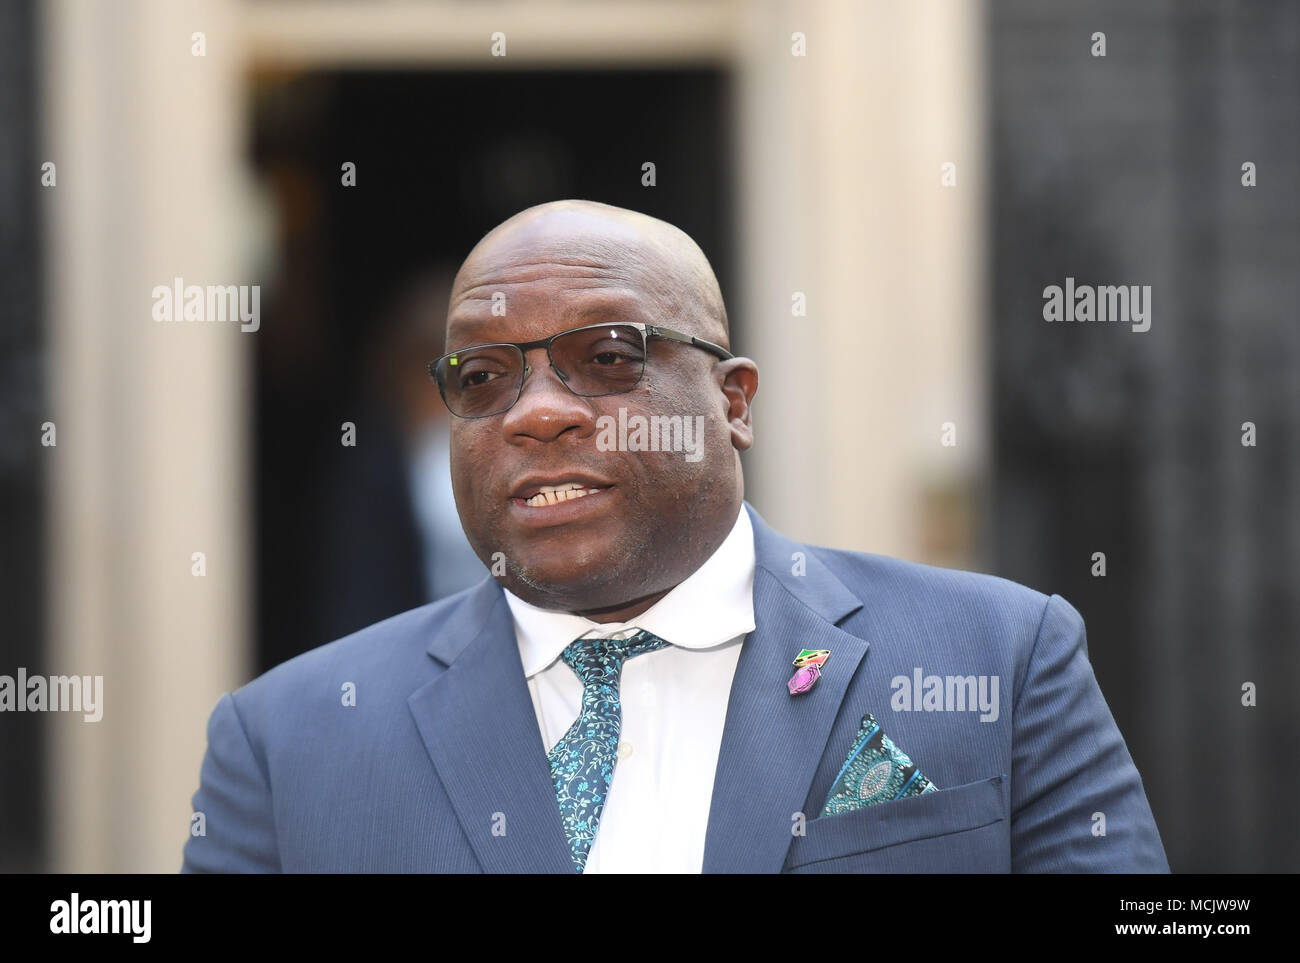 St Kitts and Nevis Timothy Harris talks to the waiting media in Downing Street after the meeting with Prime Minister Theresa May in relation to the Windrush generation immigration controversy. Stock Photo